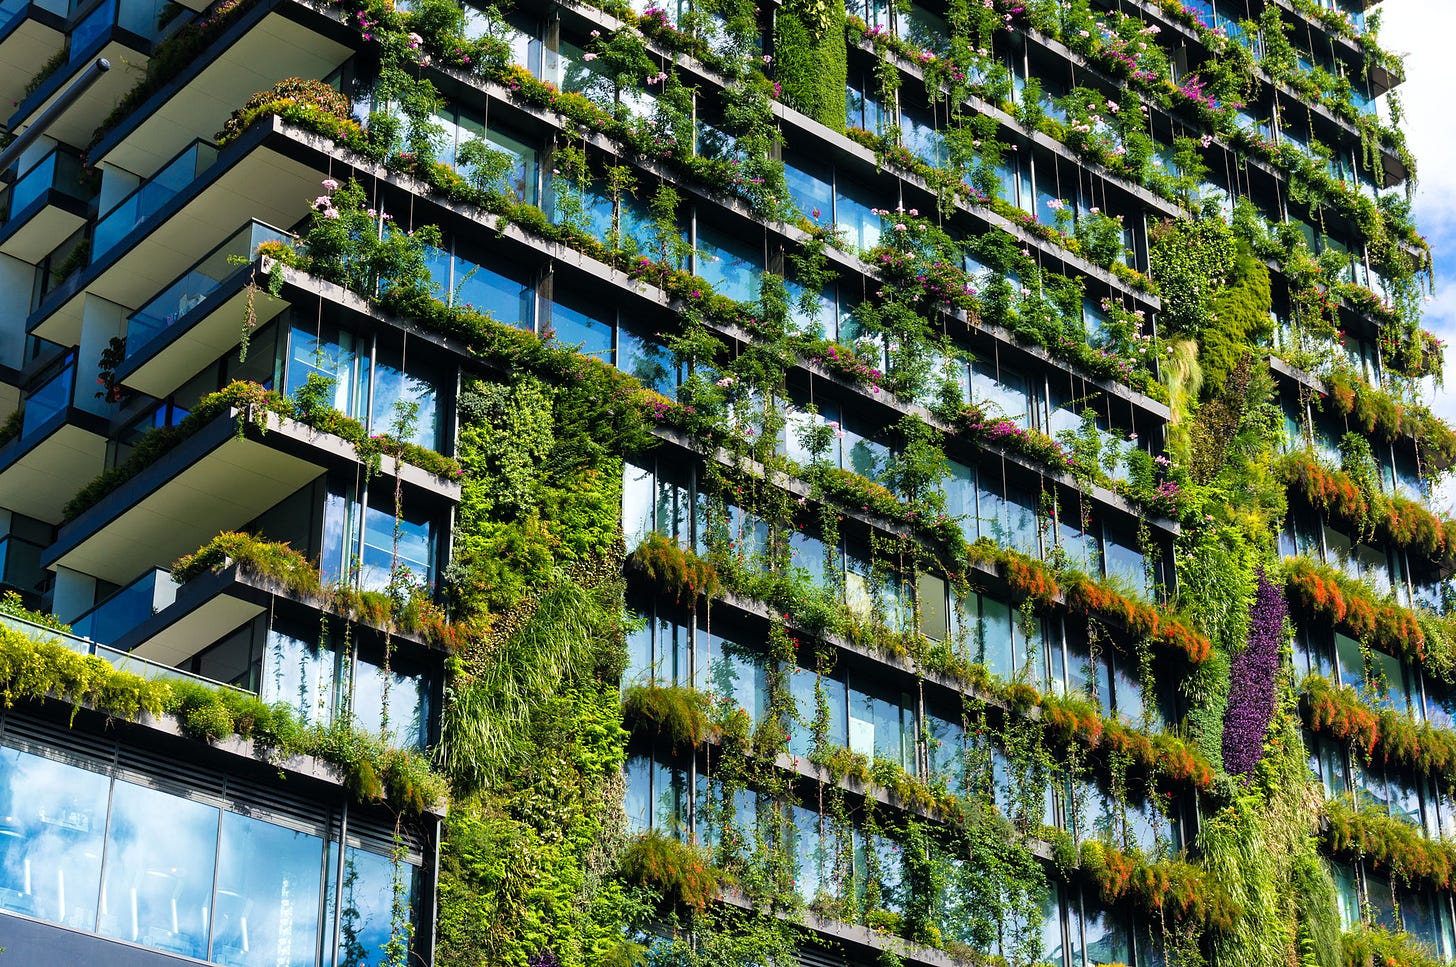 Green Buildings Are More Ecological And Cost-Effective